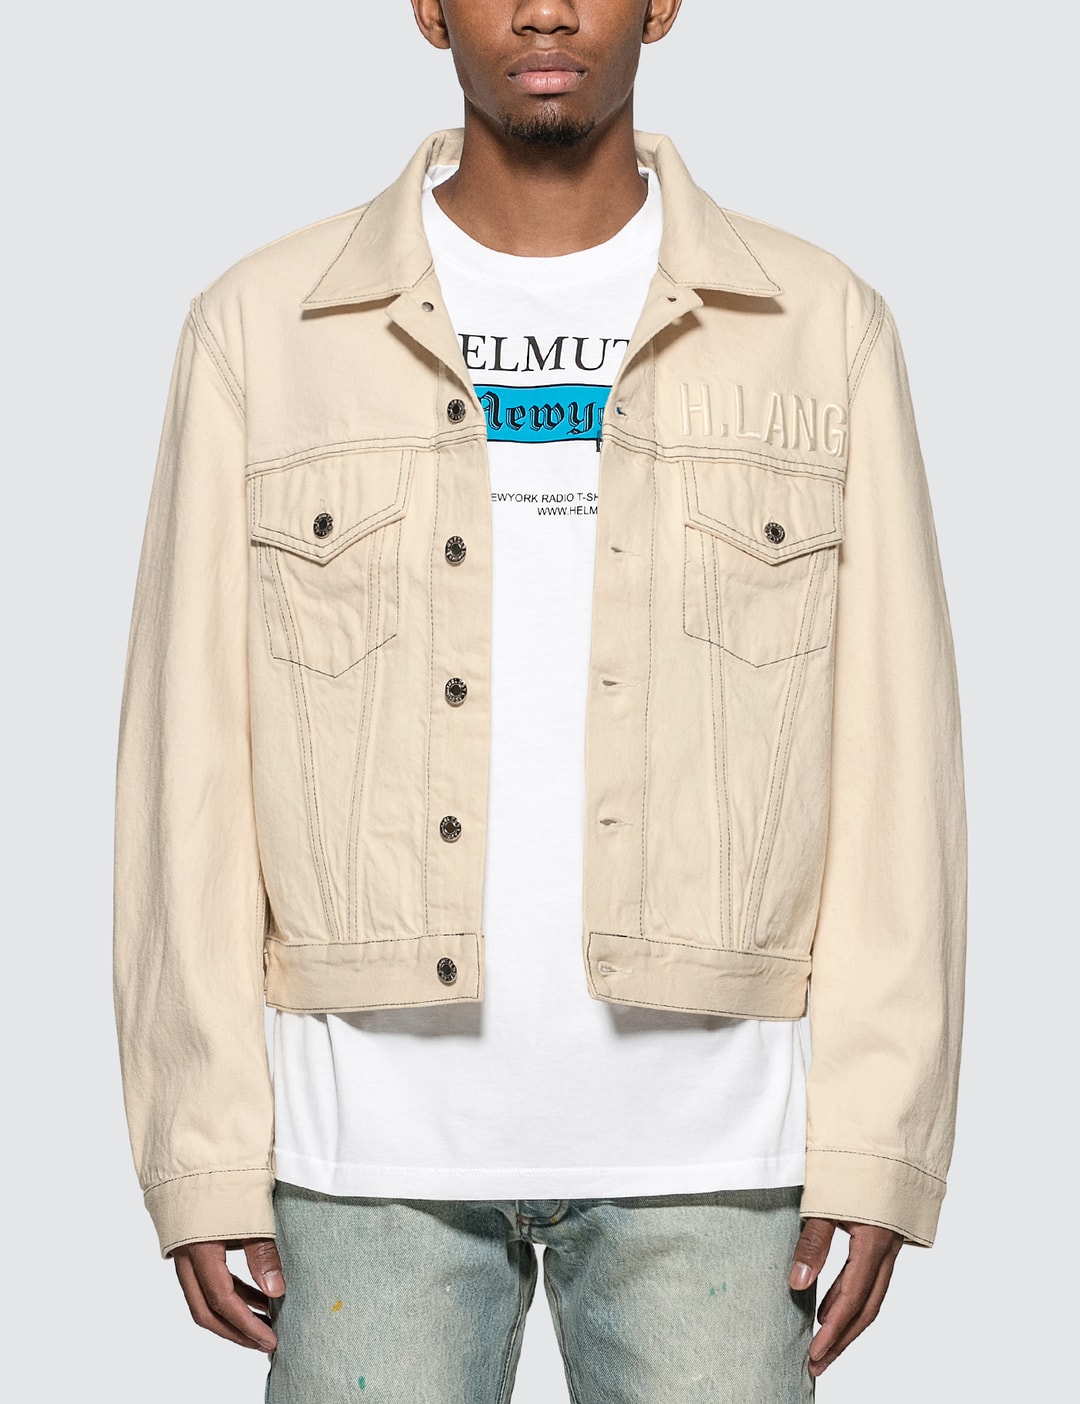 Helmut Lang - Masc Trucker Jacket | HBX - Globally Curated Fashion and ...